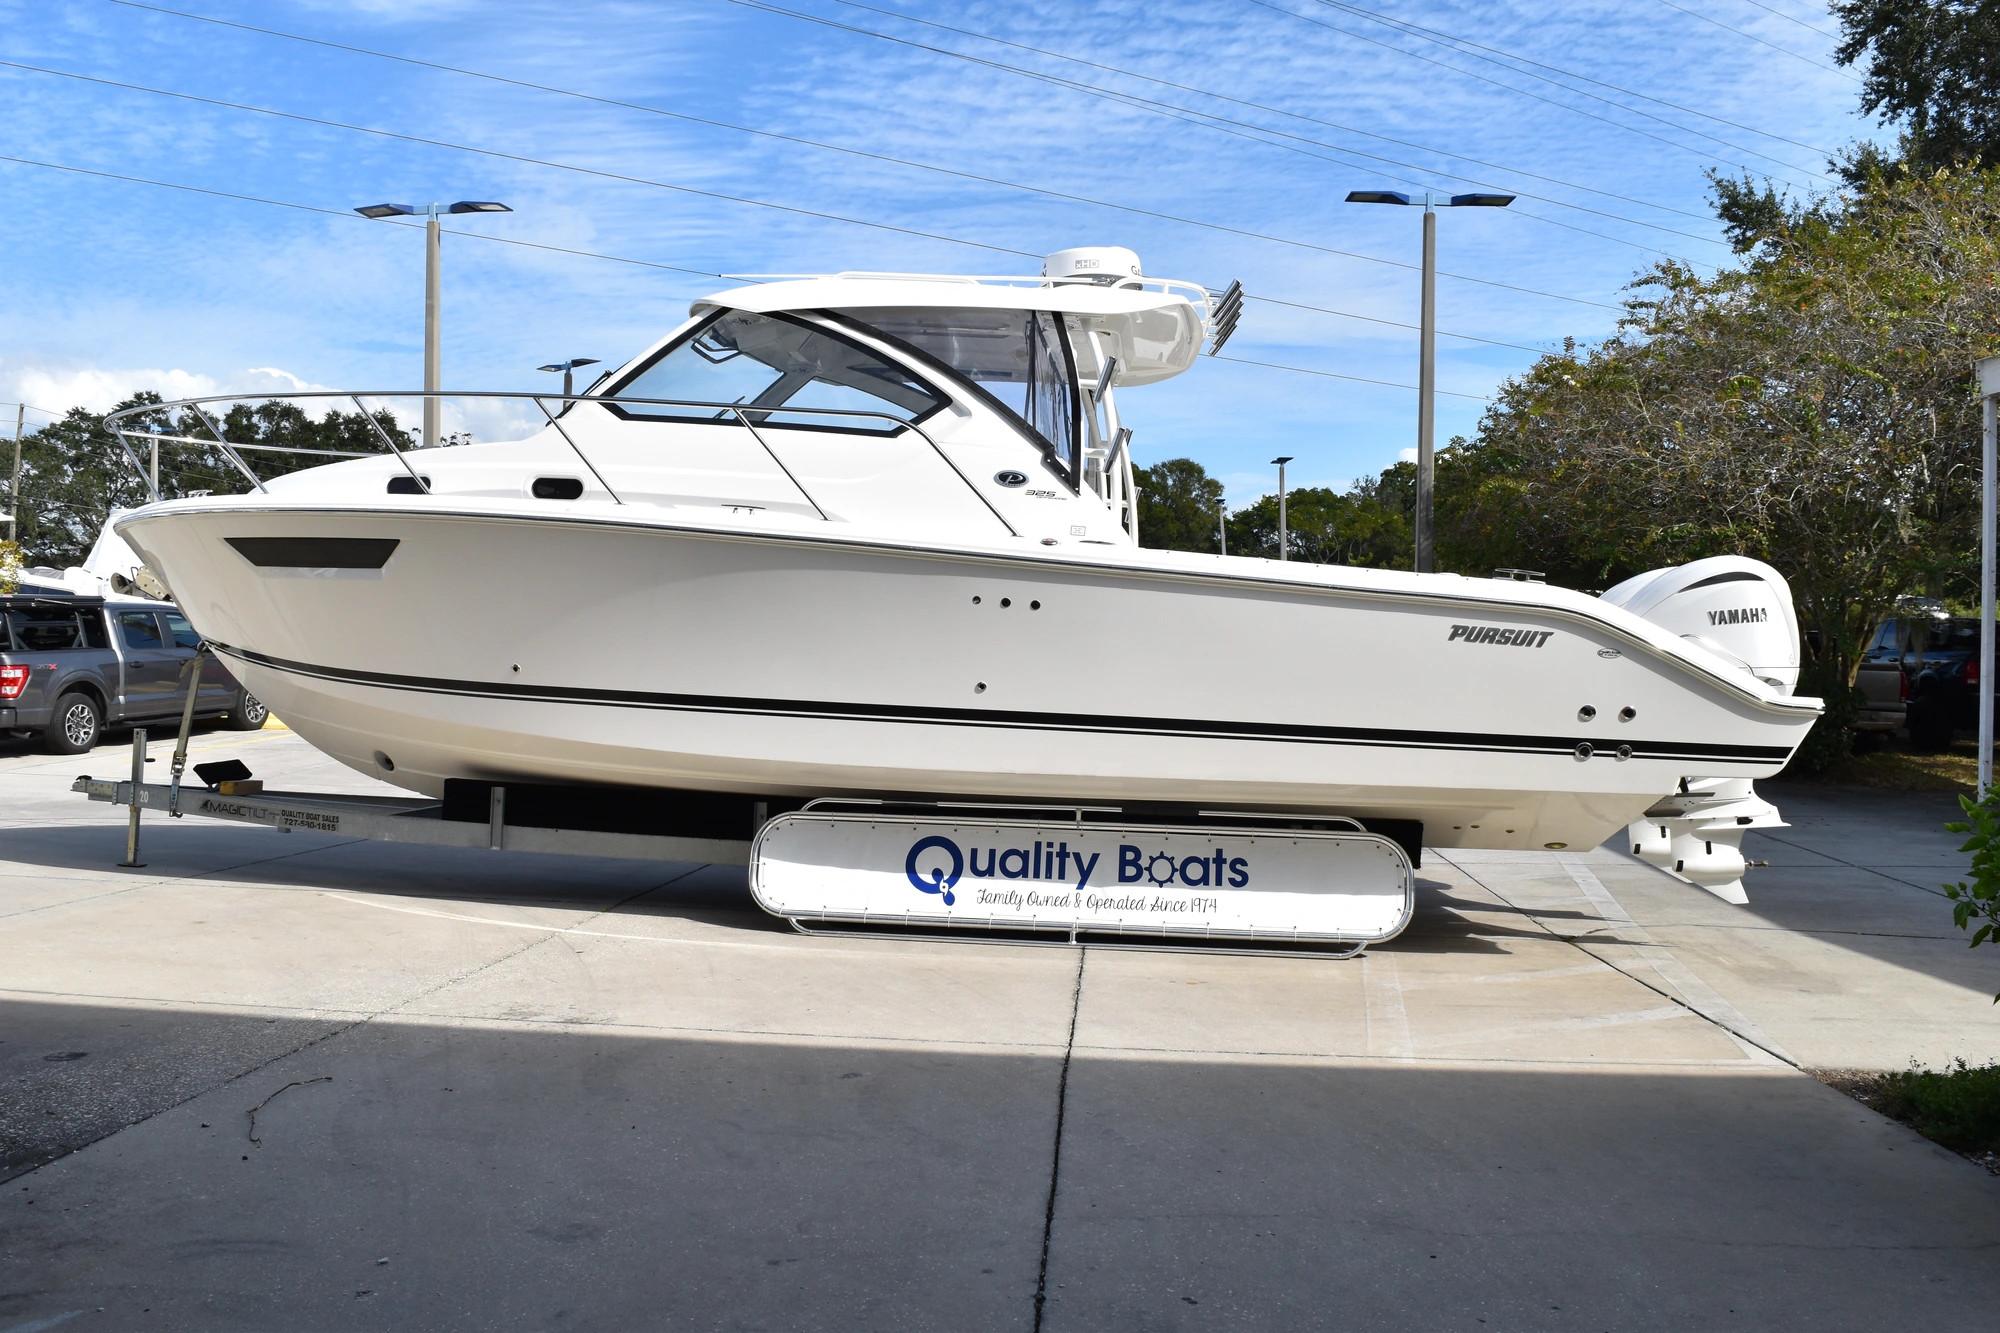 Pursuit 335 Offshore Saltwater Fishing boats for sale - Boat Trader